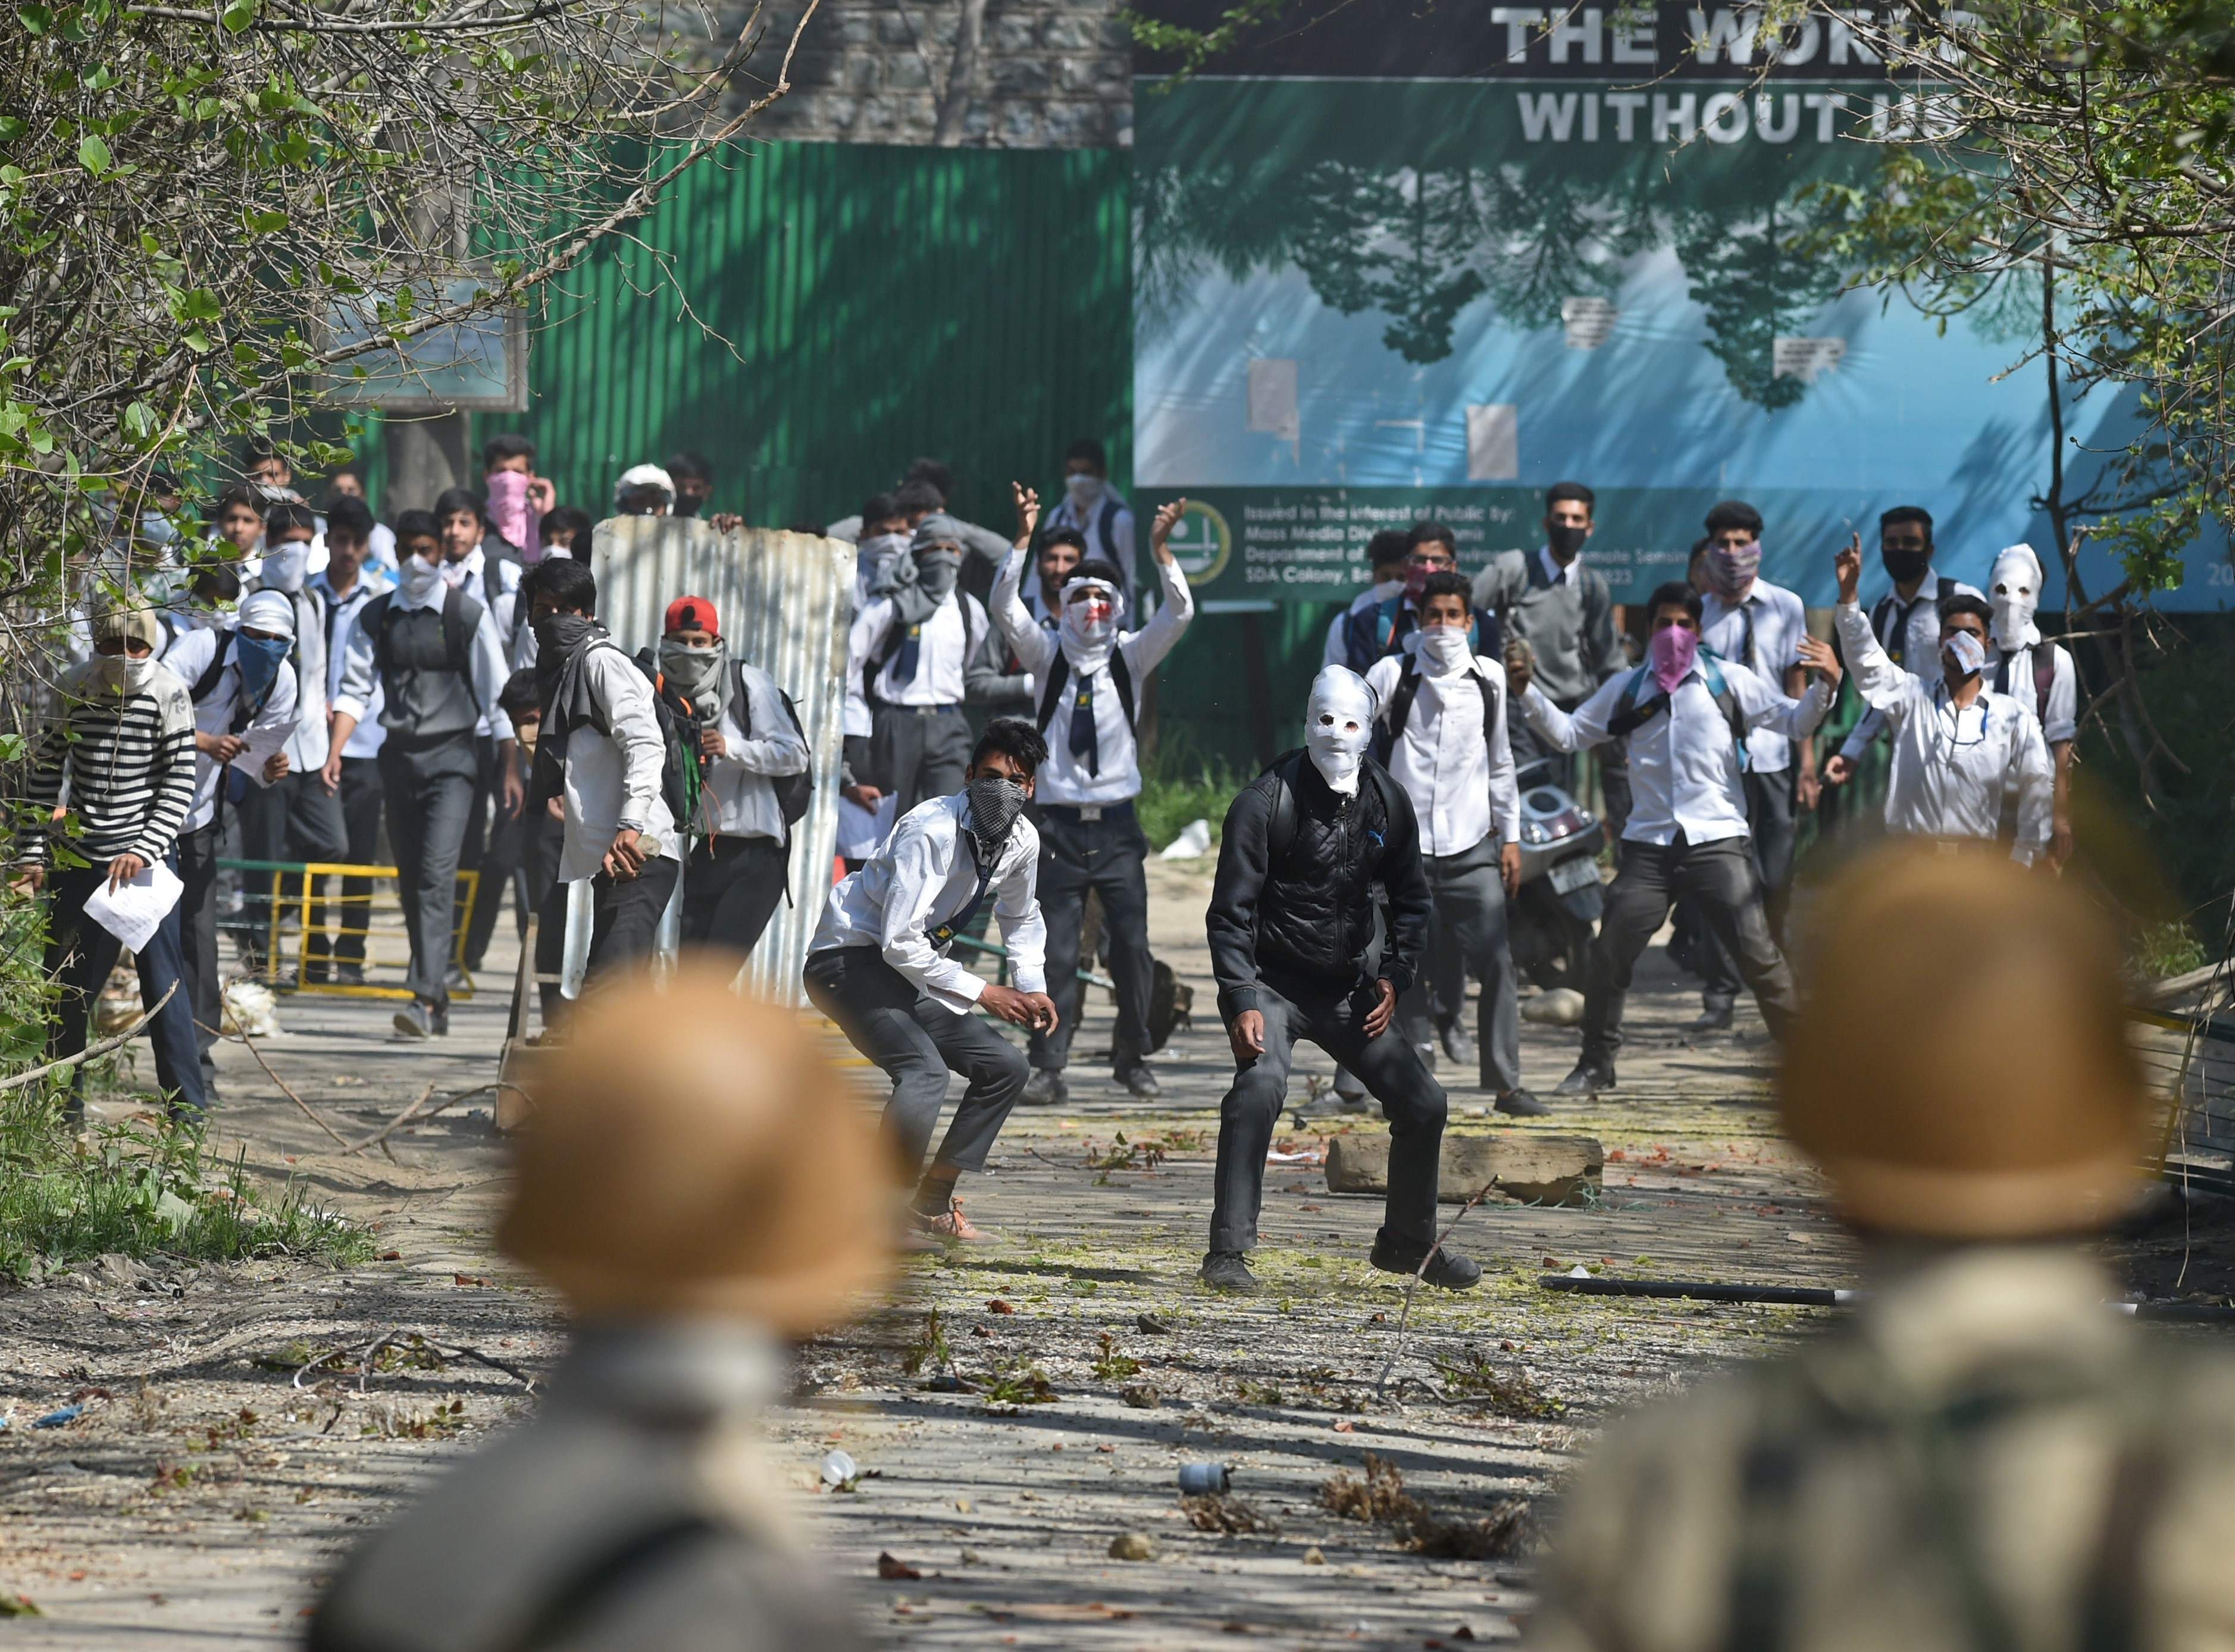 TOPSHOT - Kashmiri students clash with Indian government forces near a college in central Srinagar's Lal Chowk on April 17, 2017. Violence erupted in Srinagar April 17 as students staged a protest after more than 60 students were injured in clashes with Indian security forces at a college in the district of Pulawama last week. / AFP PHOTO / Tauseef MUSTAFA / TT / kod 444